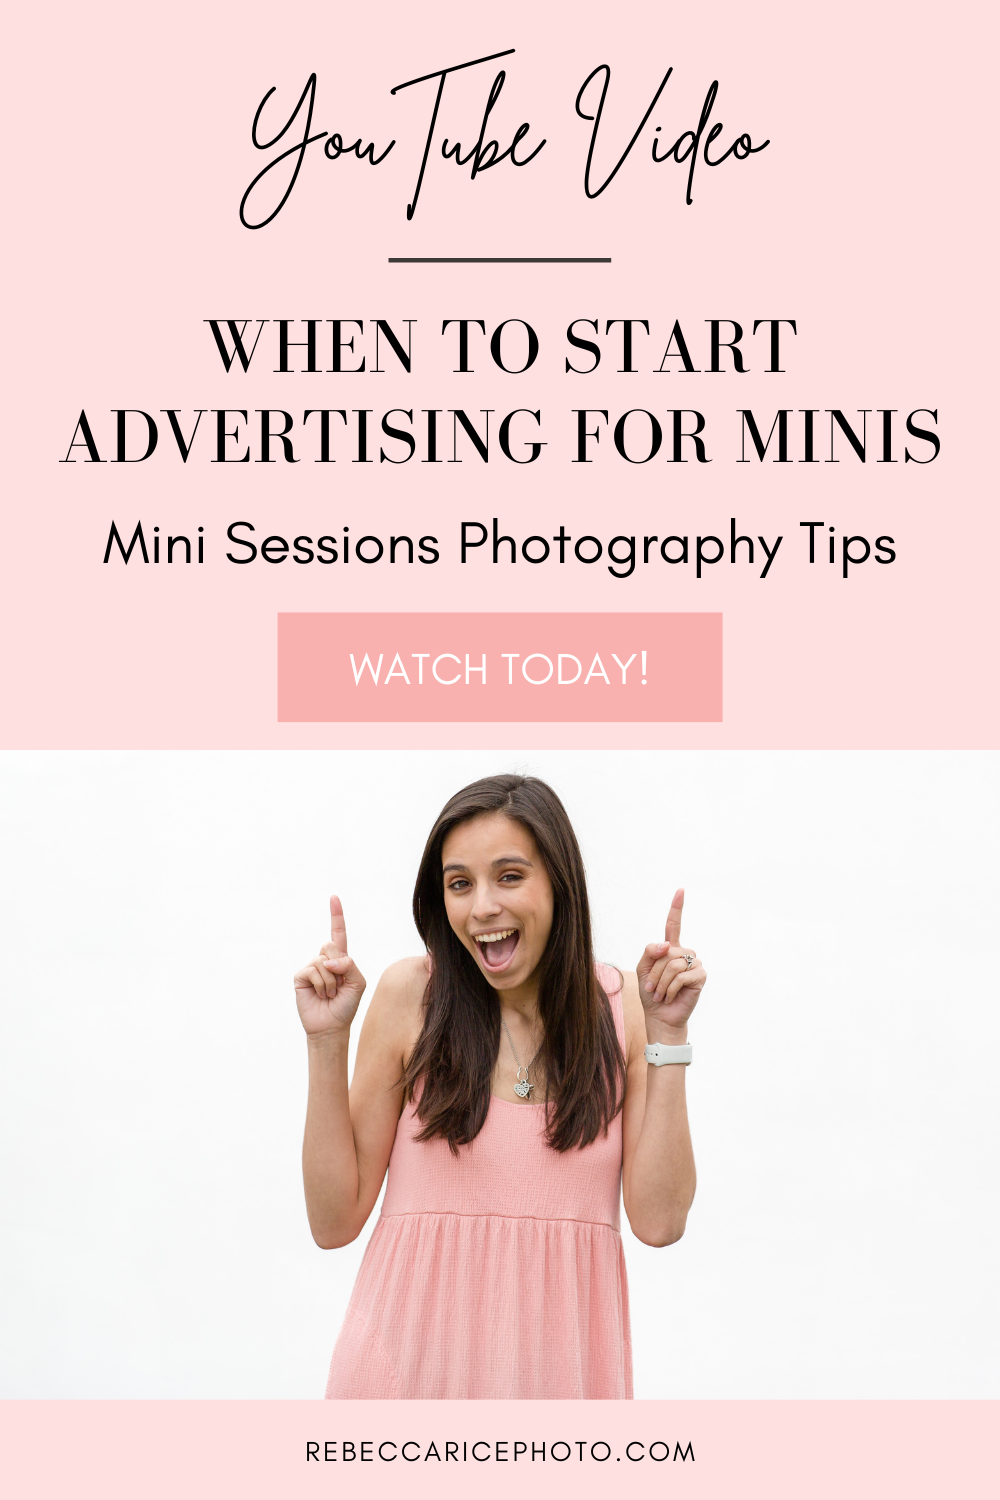 When to Start Advertising For Minis